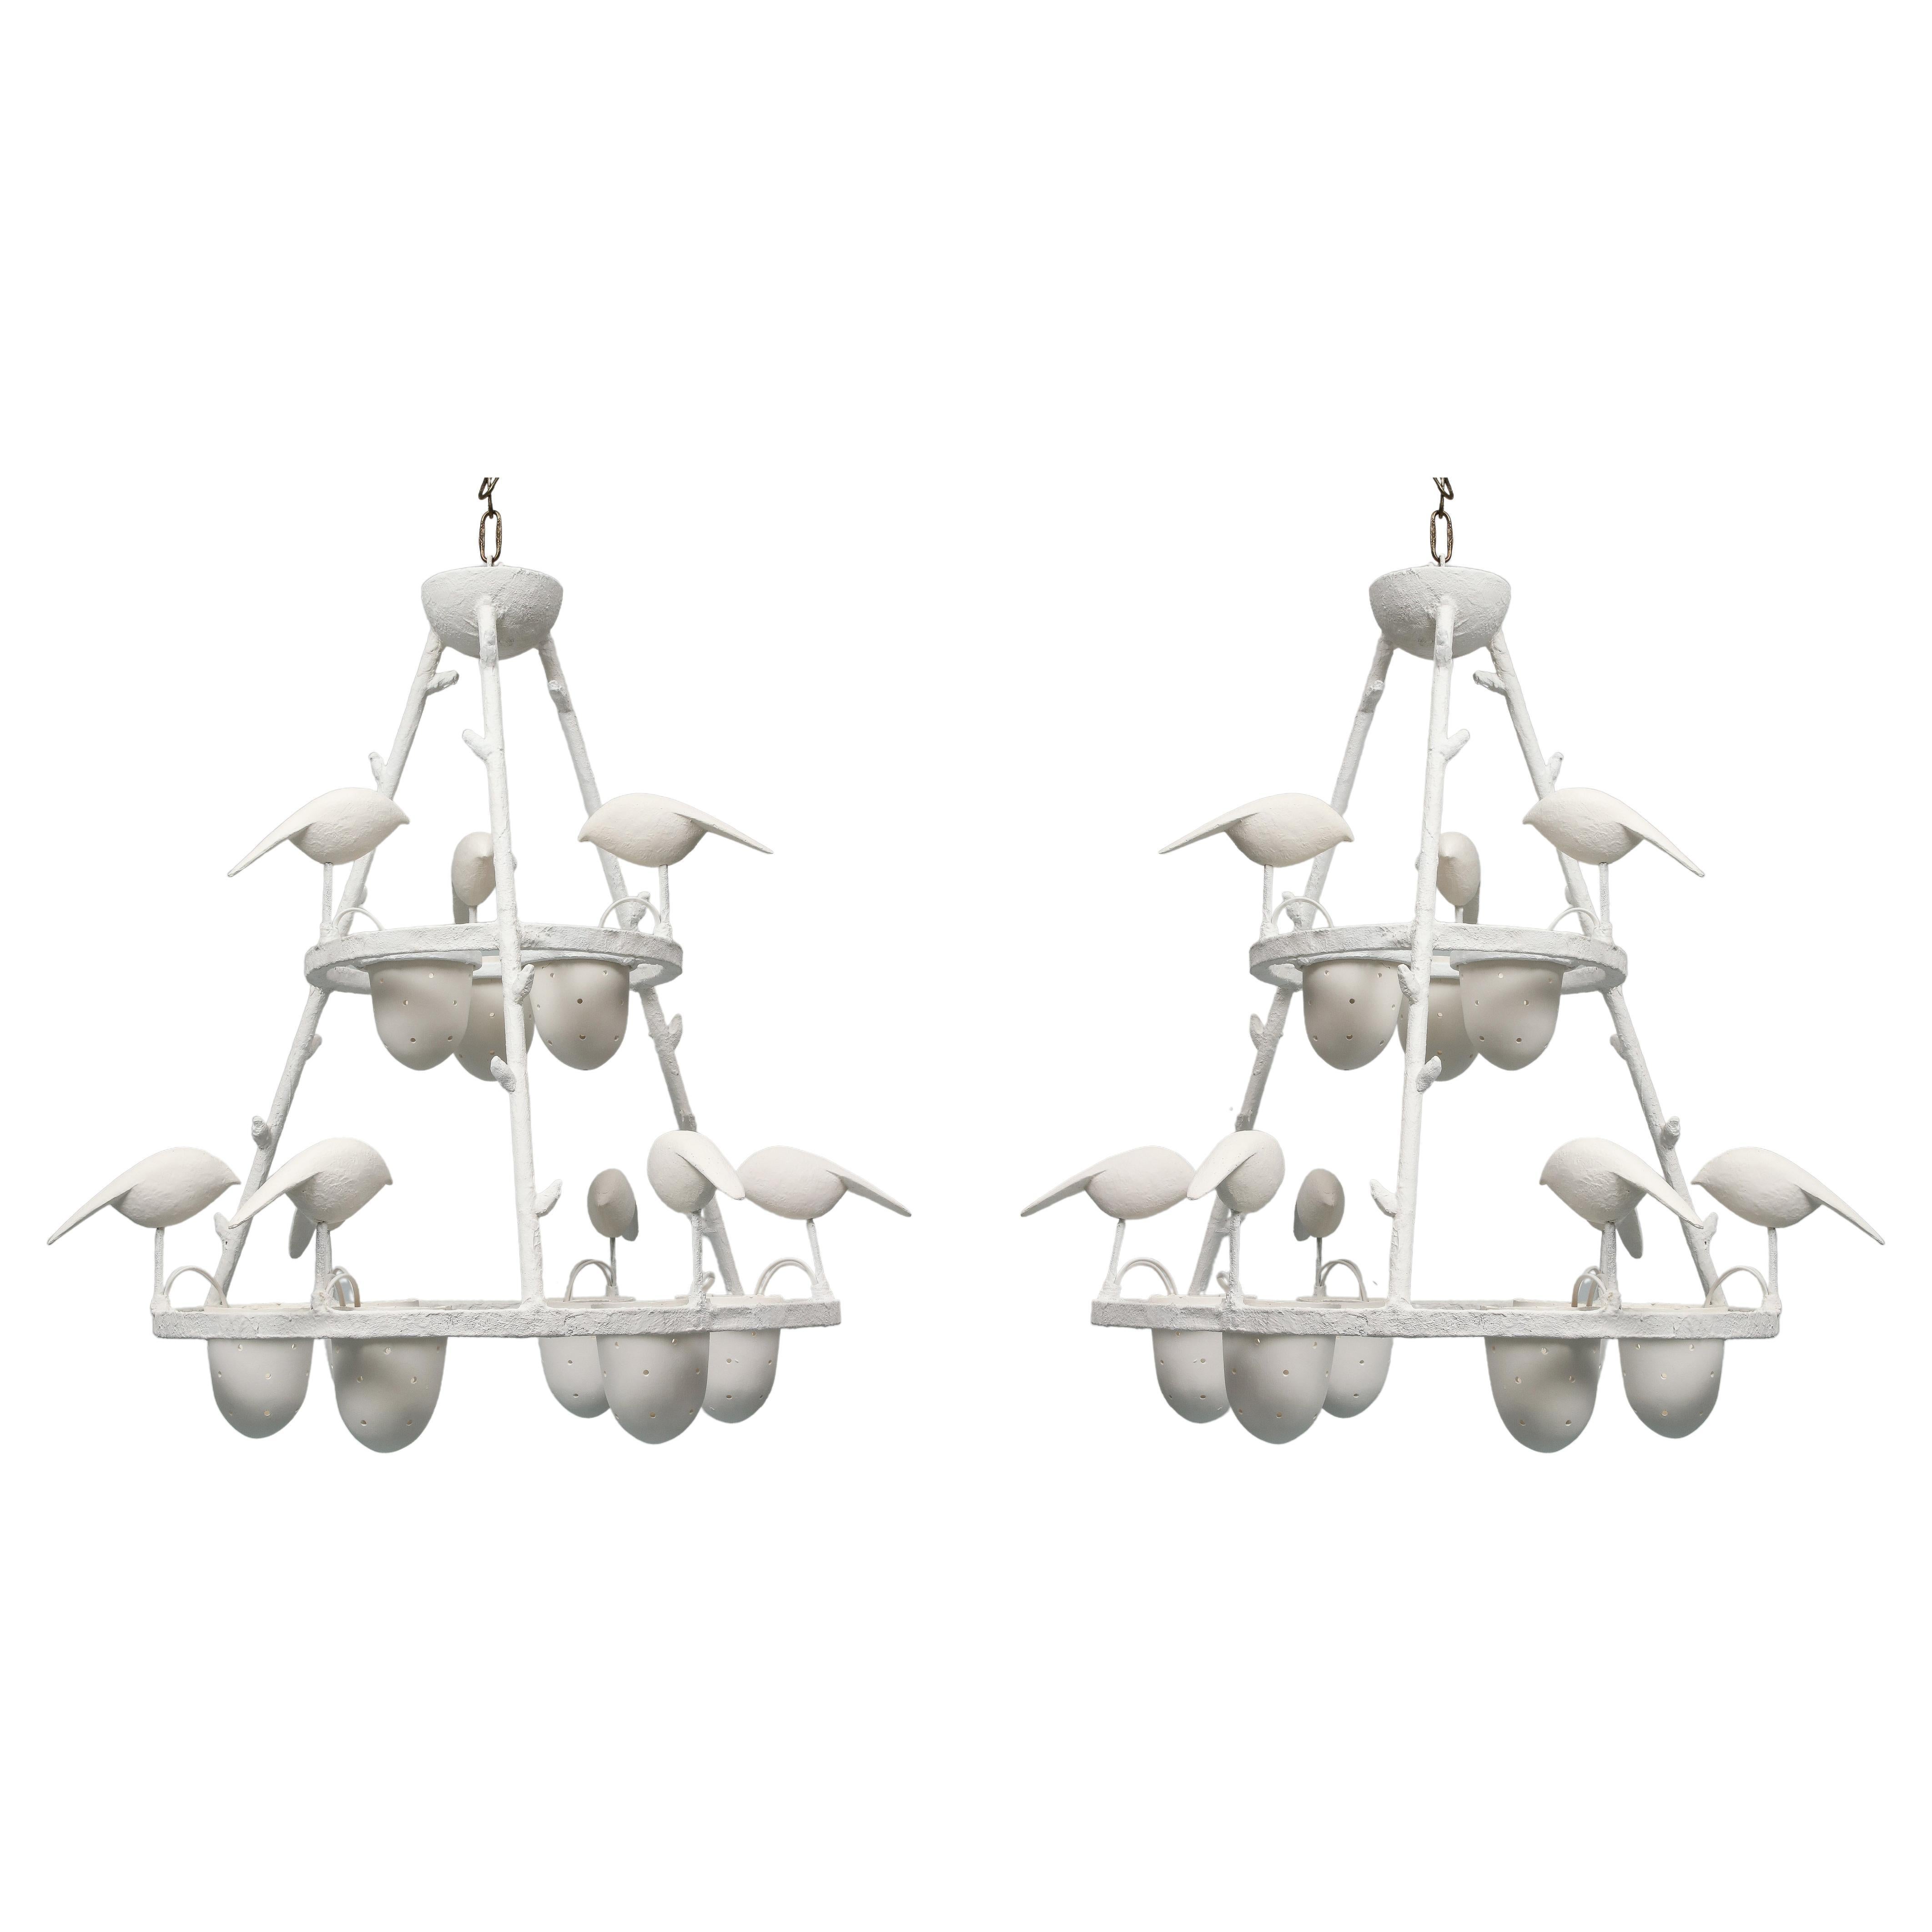 Mid-Century Modern Jacques Darbaud Pair Of White Plaster Chandeliers